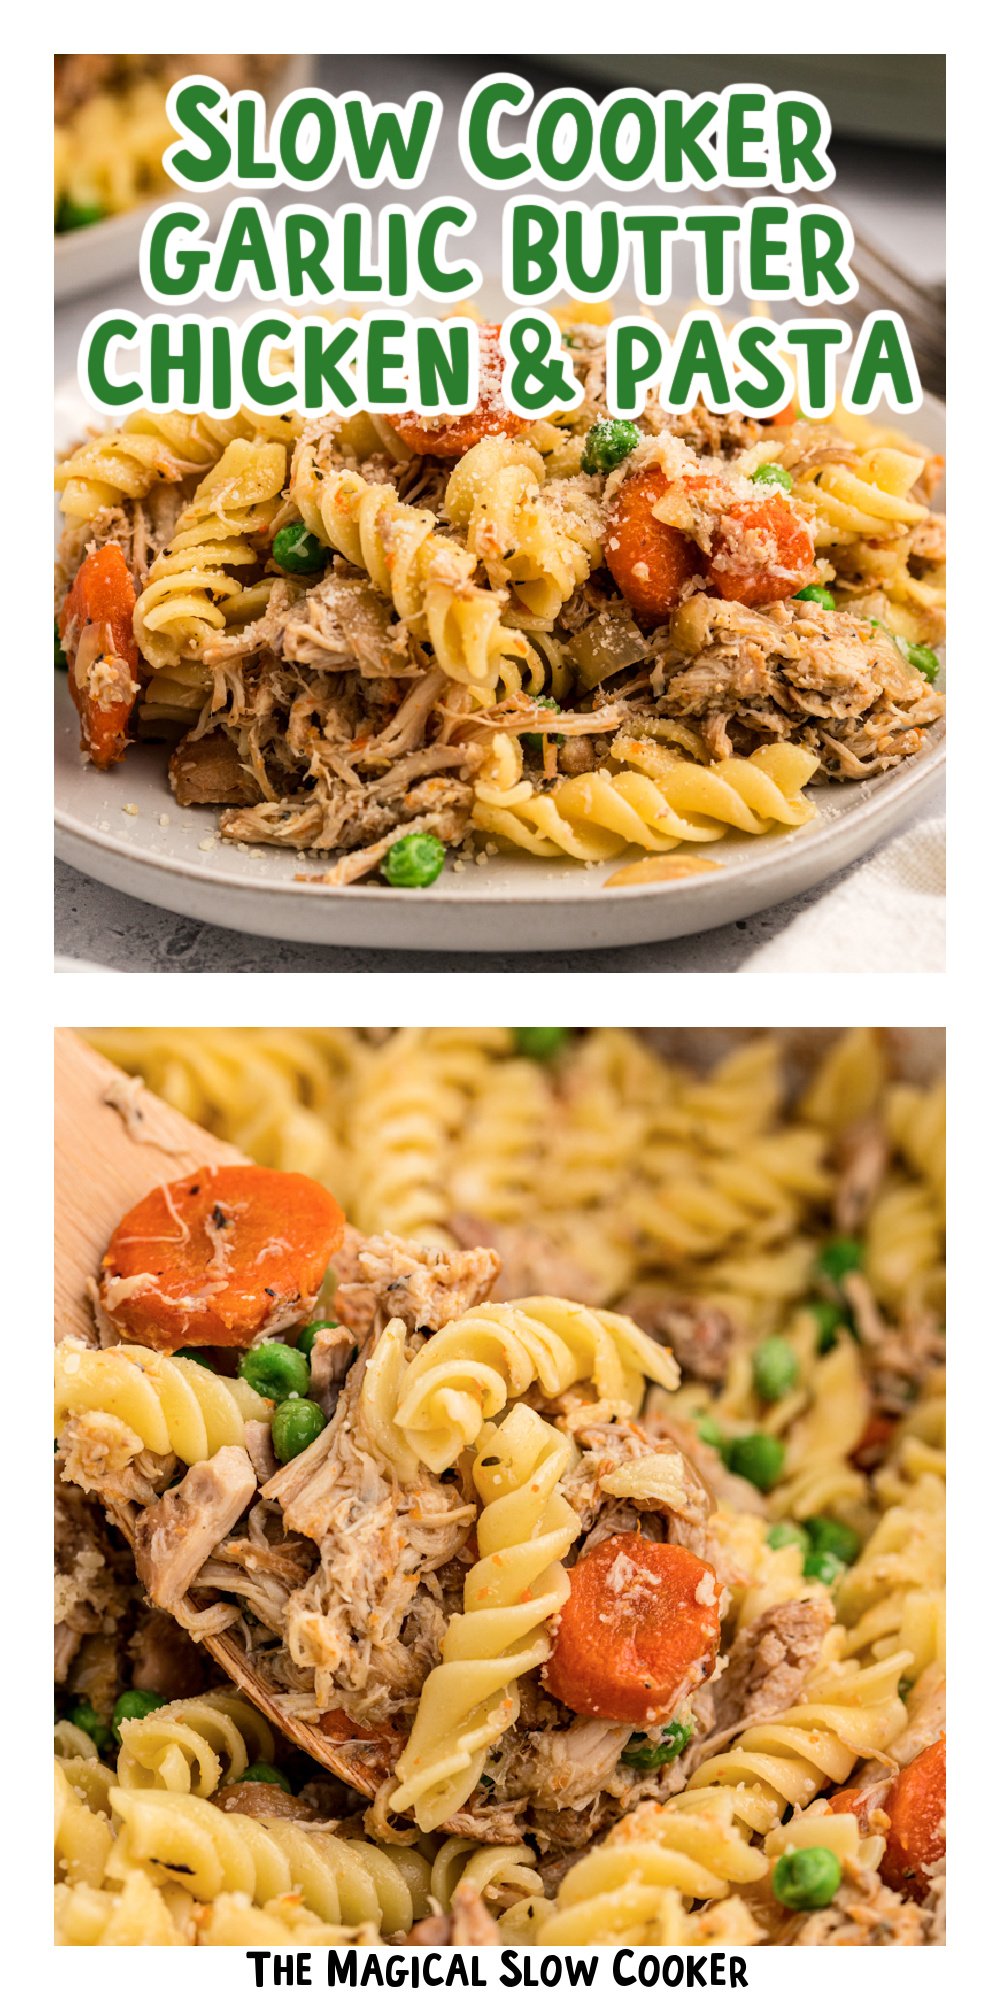 two images of slow cooker garlic butter chicken and pasta with text overlay.